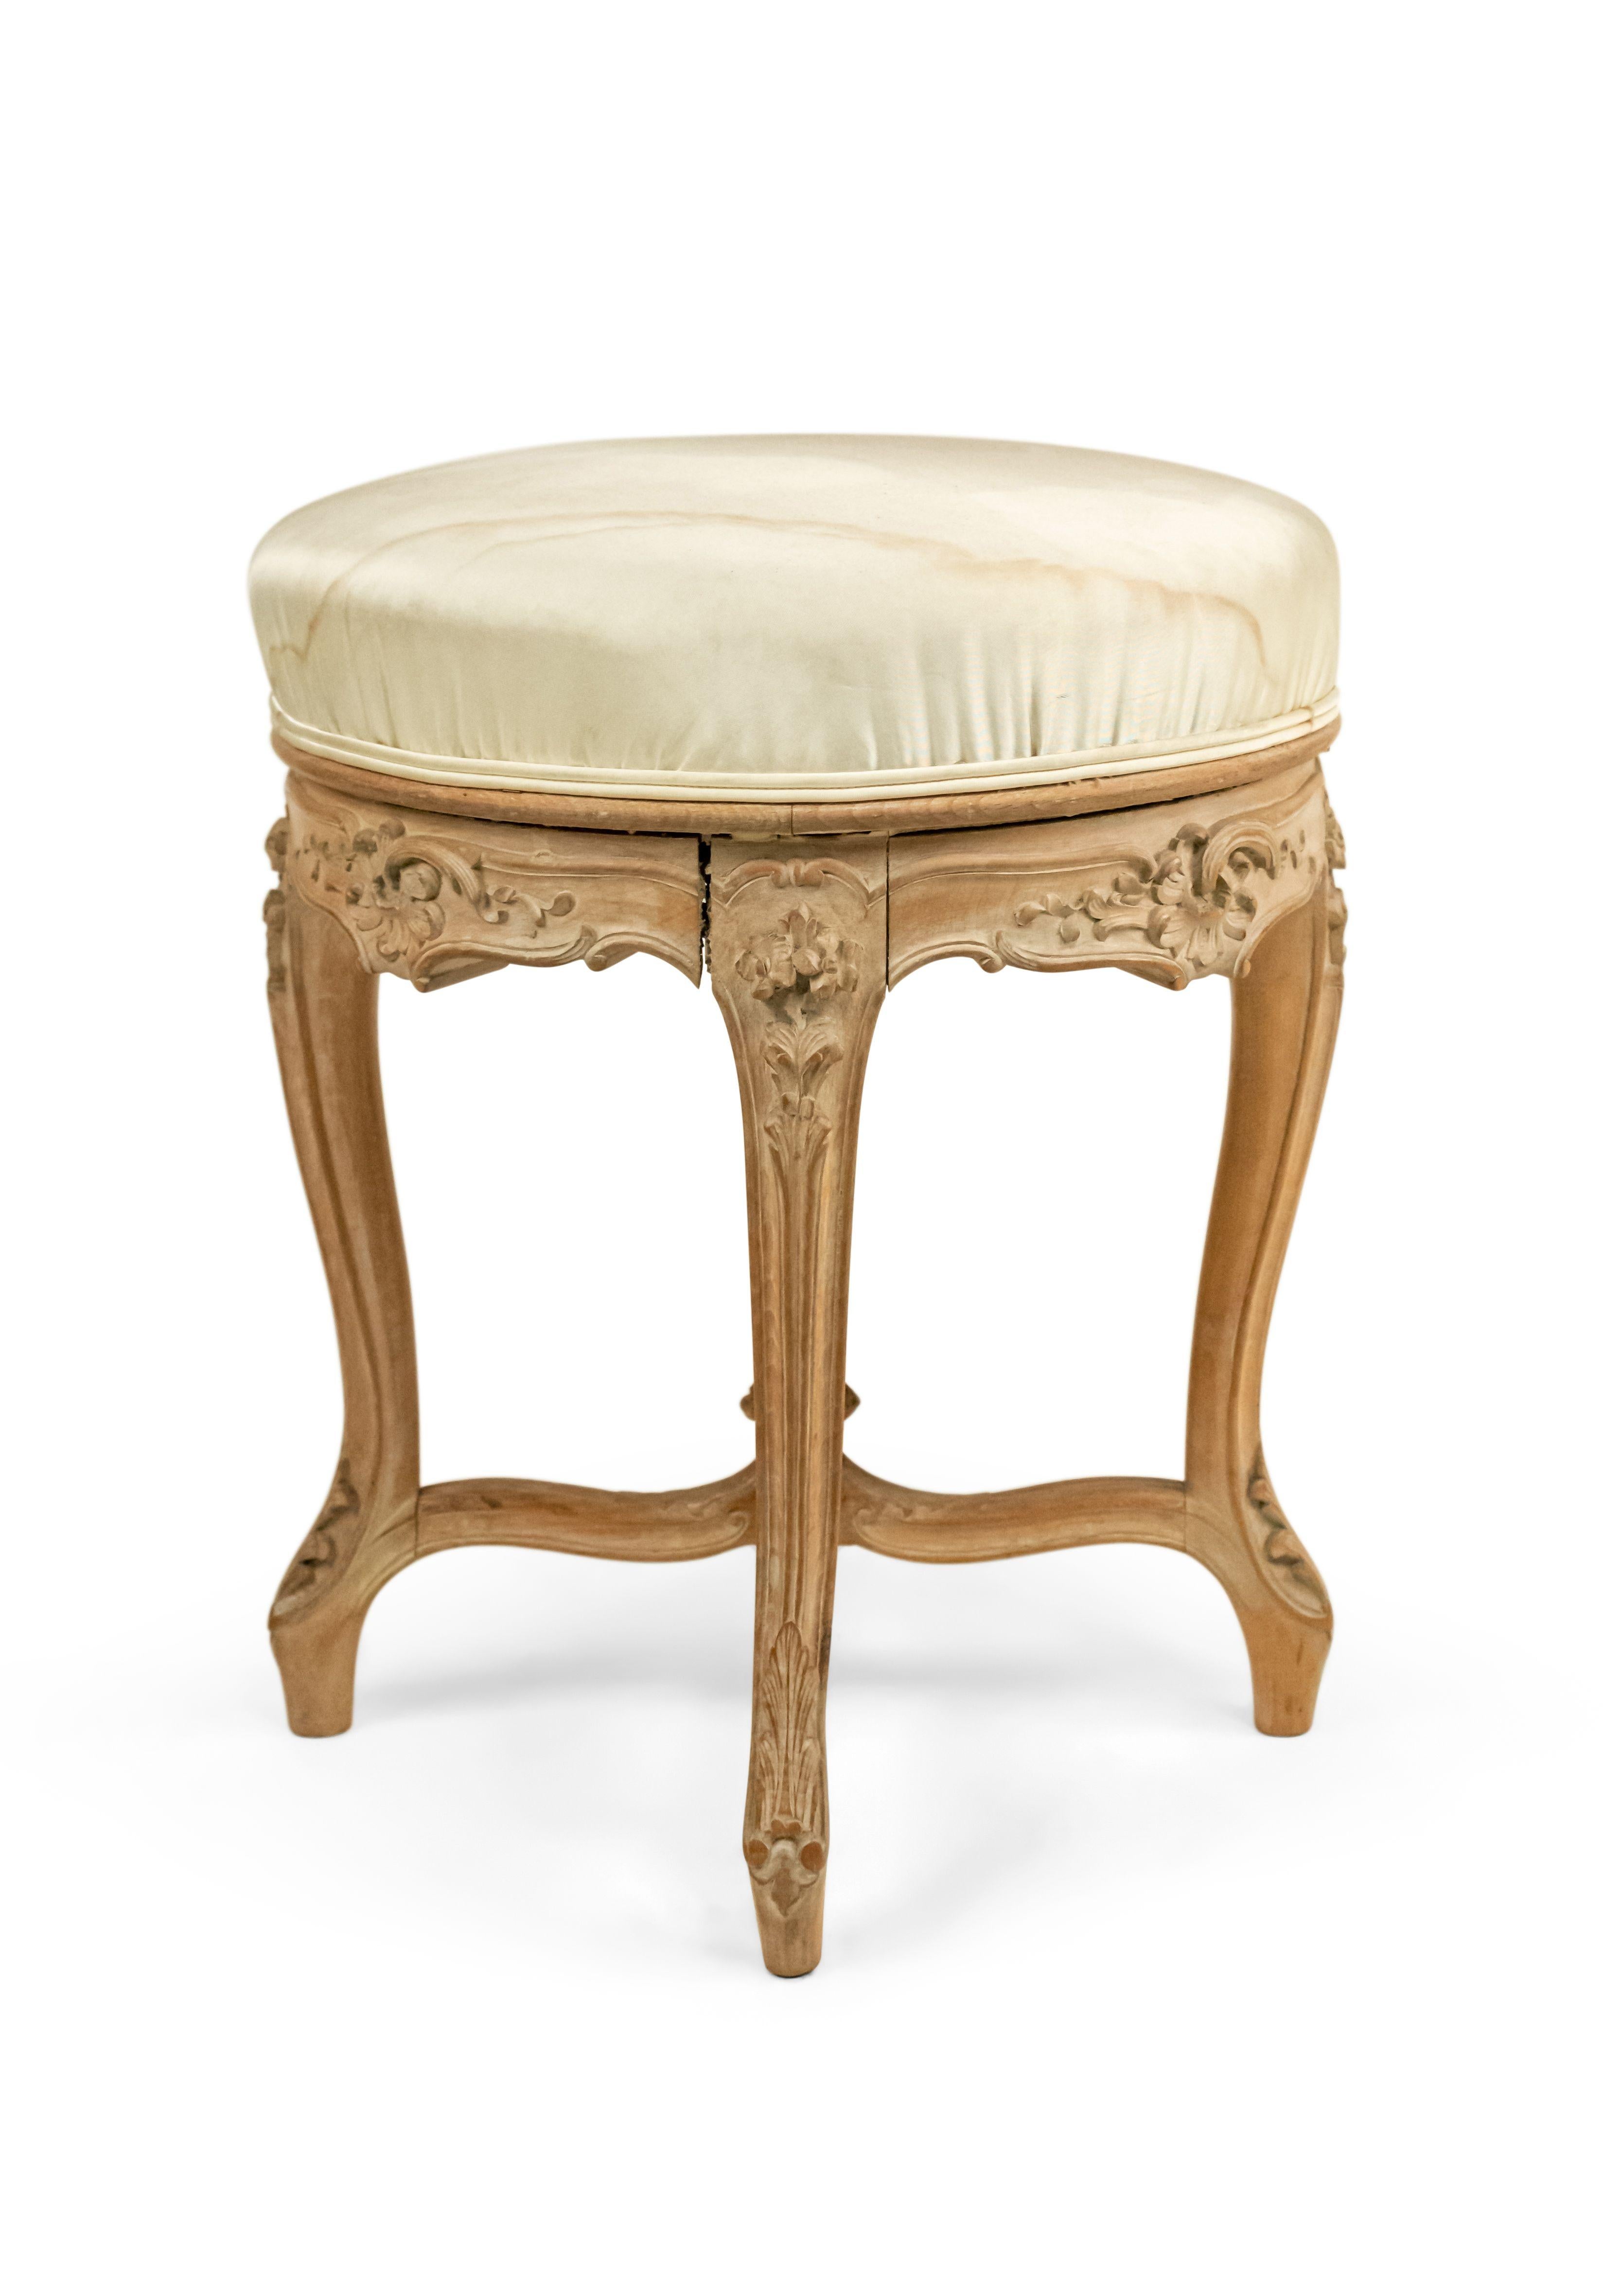 French Louis XV style (19/20th Century) round bleached bench with white satin upholstery.
